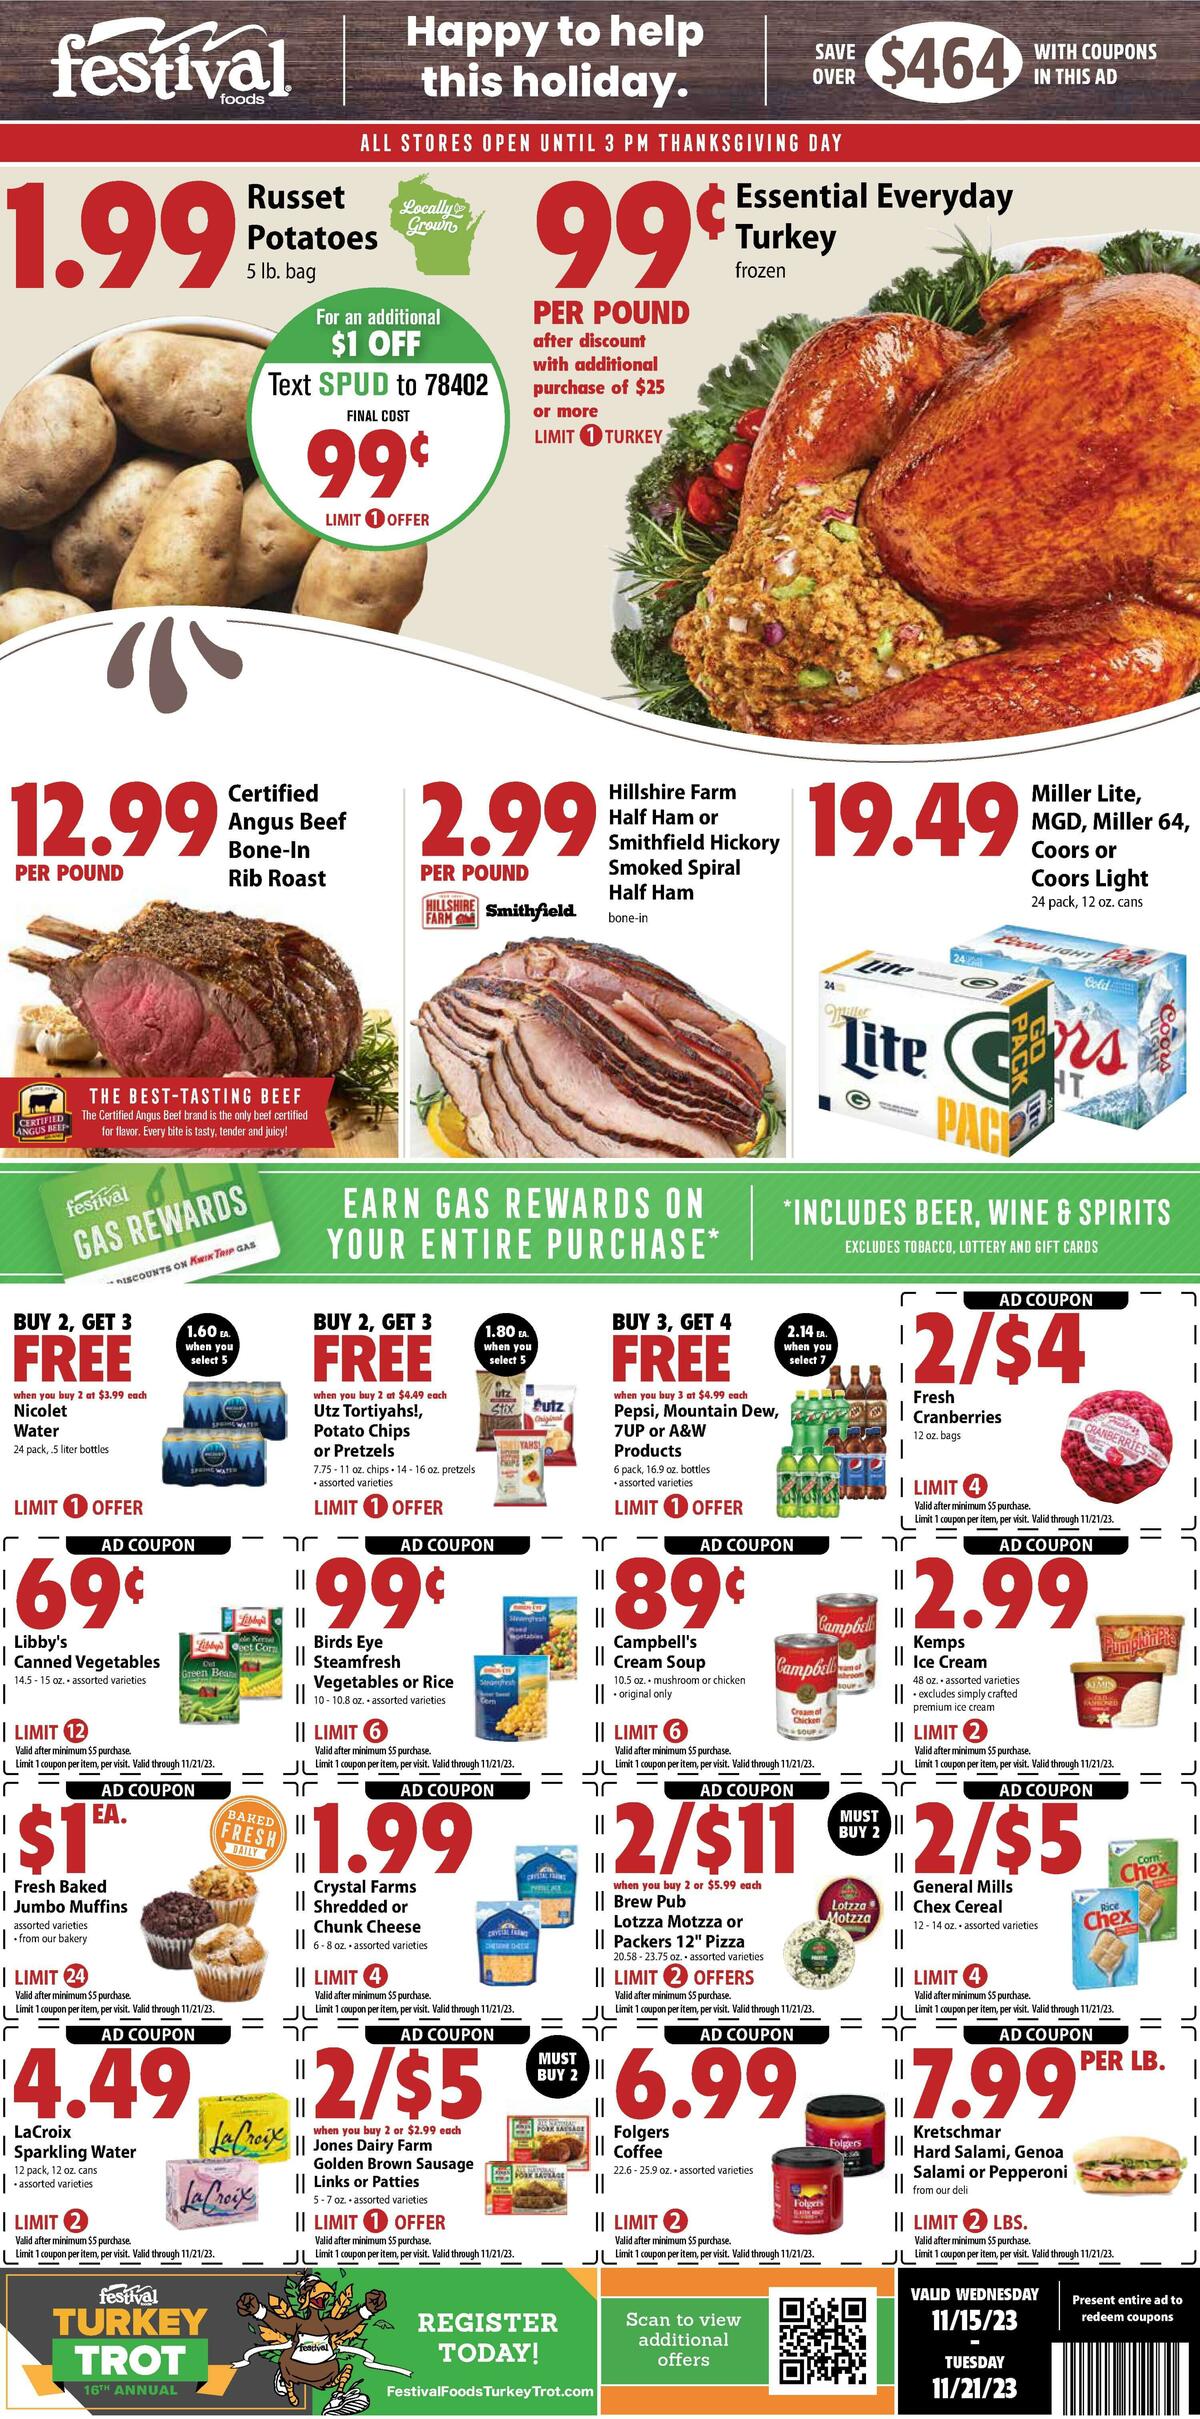 Festival Foods Weekly Ad & Specials from November 15